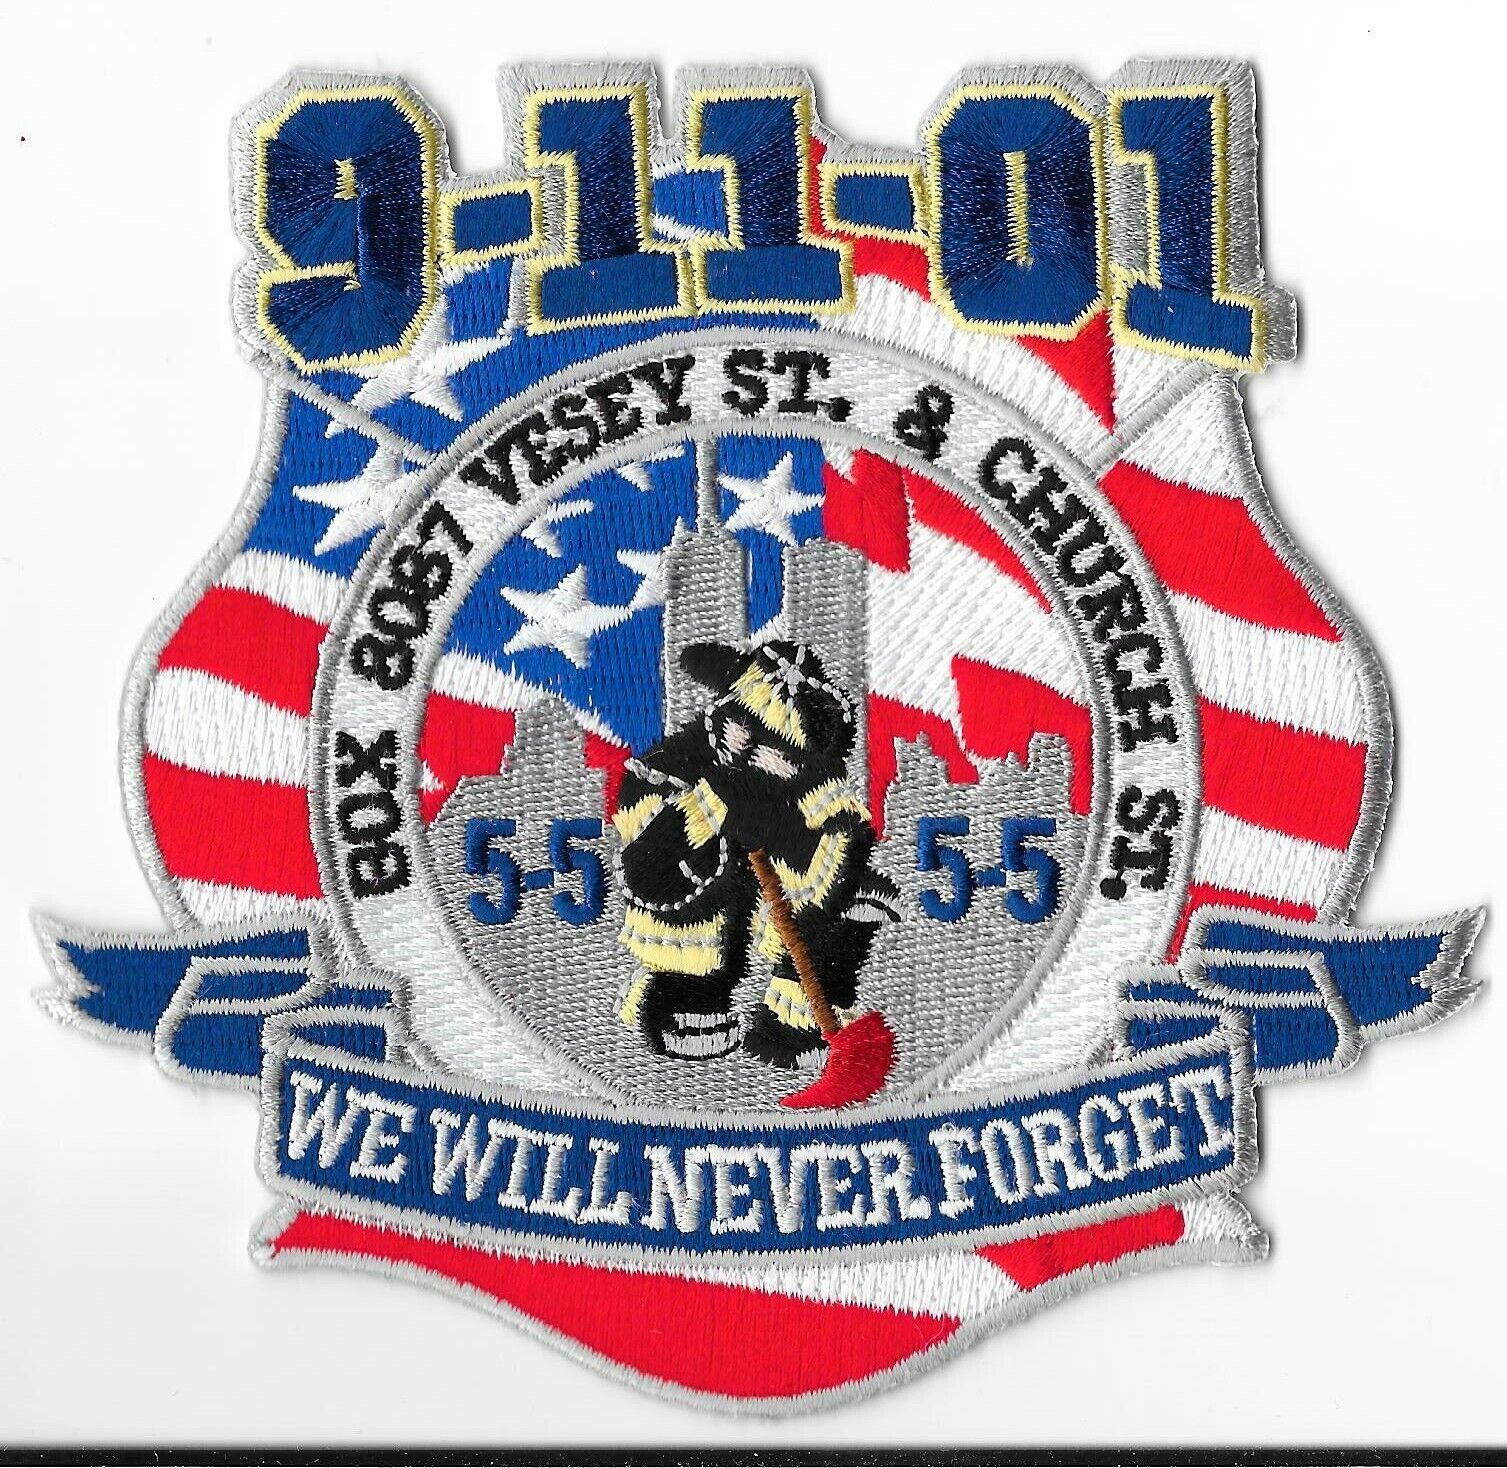 New York Fire Department (FDNY) 9-11-01 Vesey St & Church St Patch V1